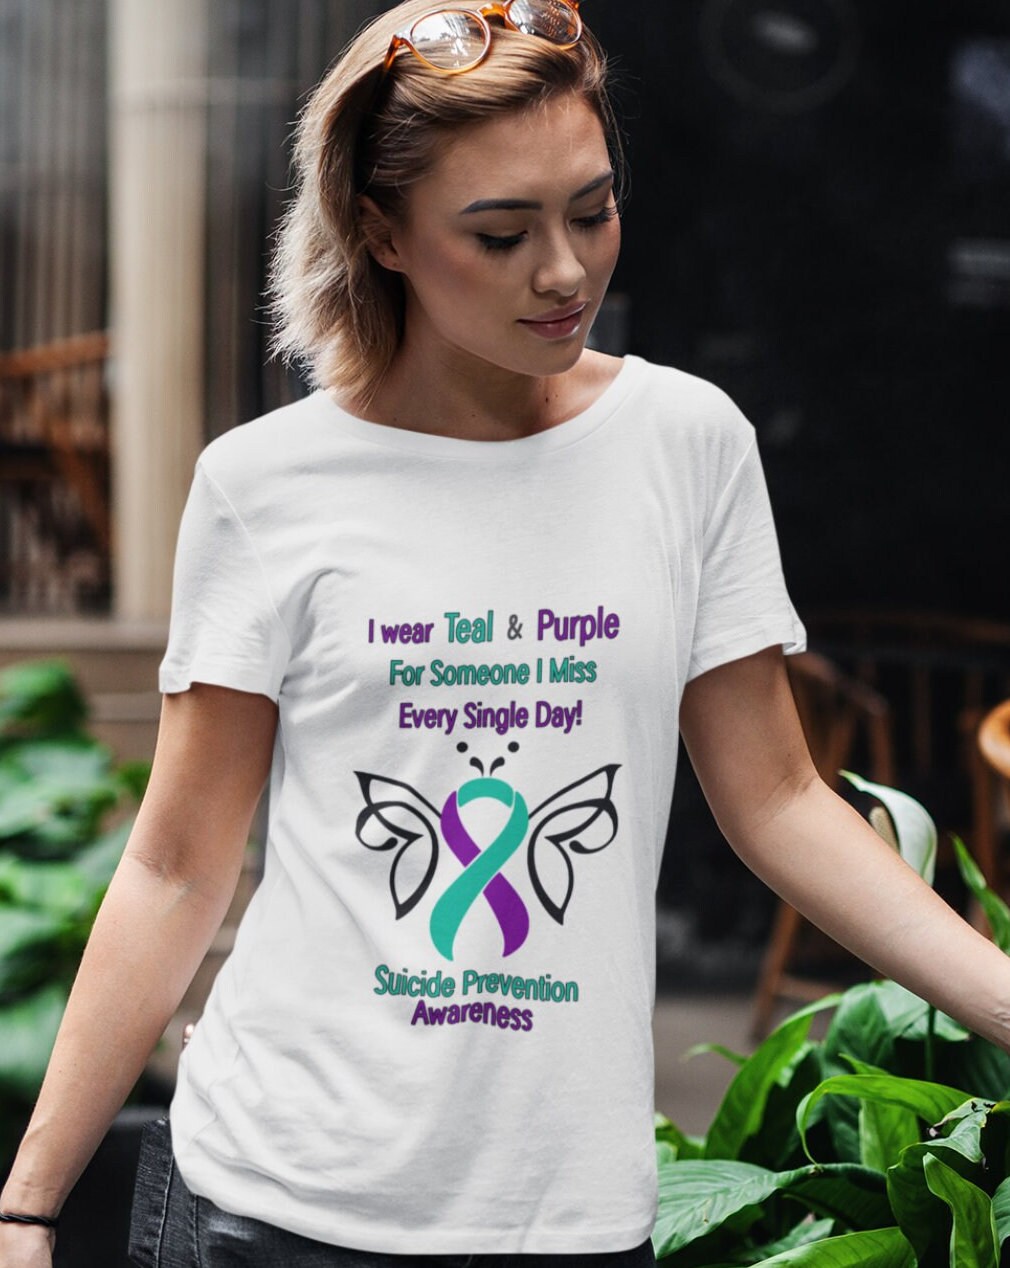 Suicide Prevention Awareness T-shirt Teal and Purple Ribbon - Etsy